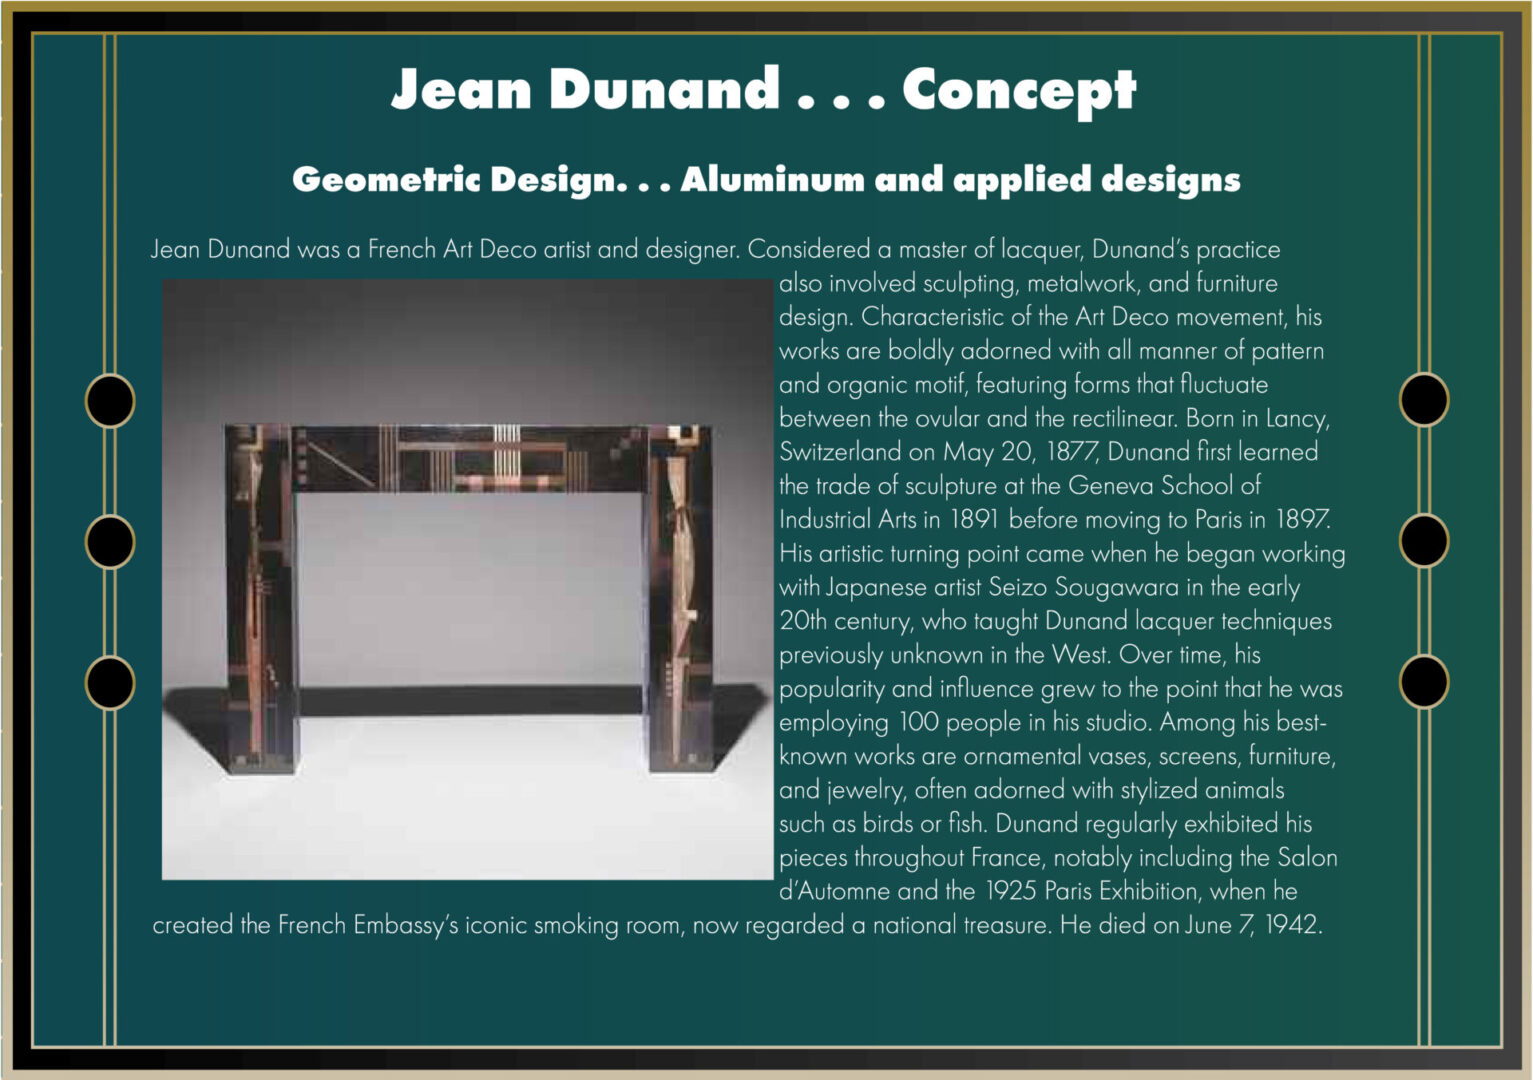 Geometric design in aluminum by Jean Dunand